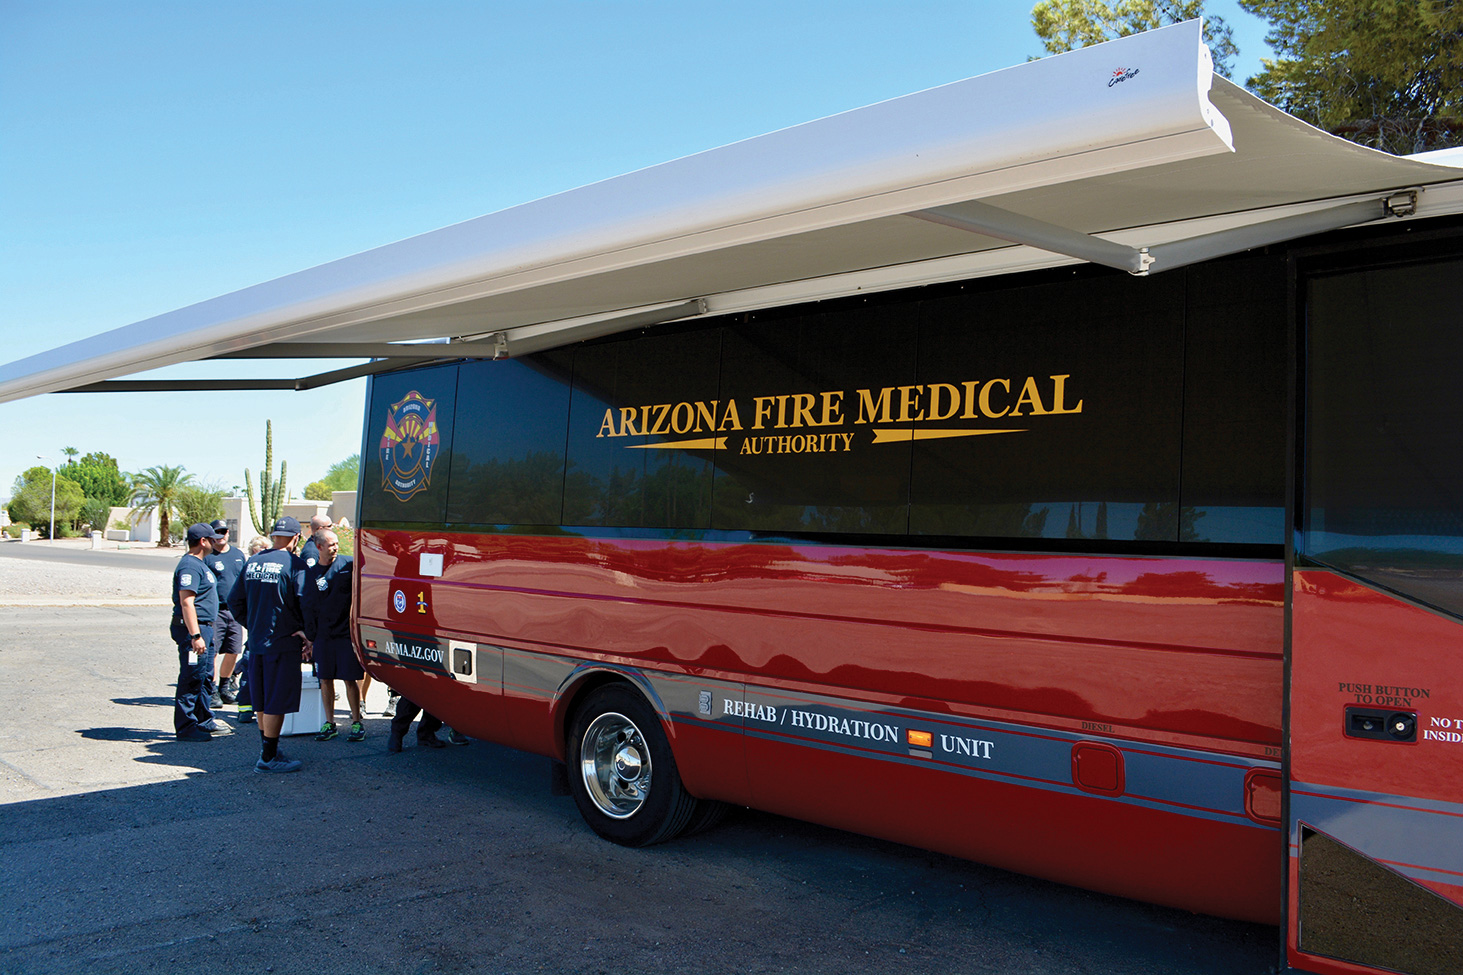 AFMA/Sun Lakes firefighters familiarize themselves with the new rehabilitation and rehydration unit in front of Station 231 on Sun Lakes Boulevard. (Photo by Brian Curry)